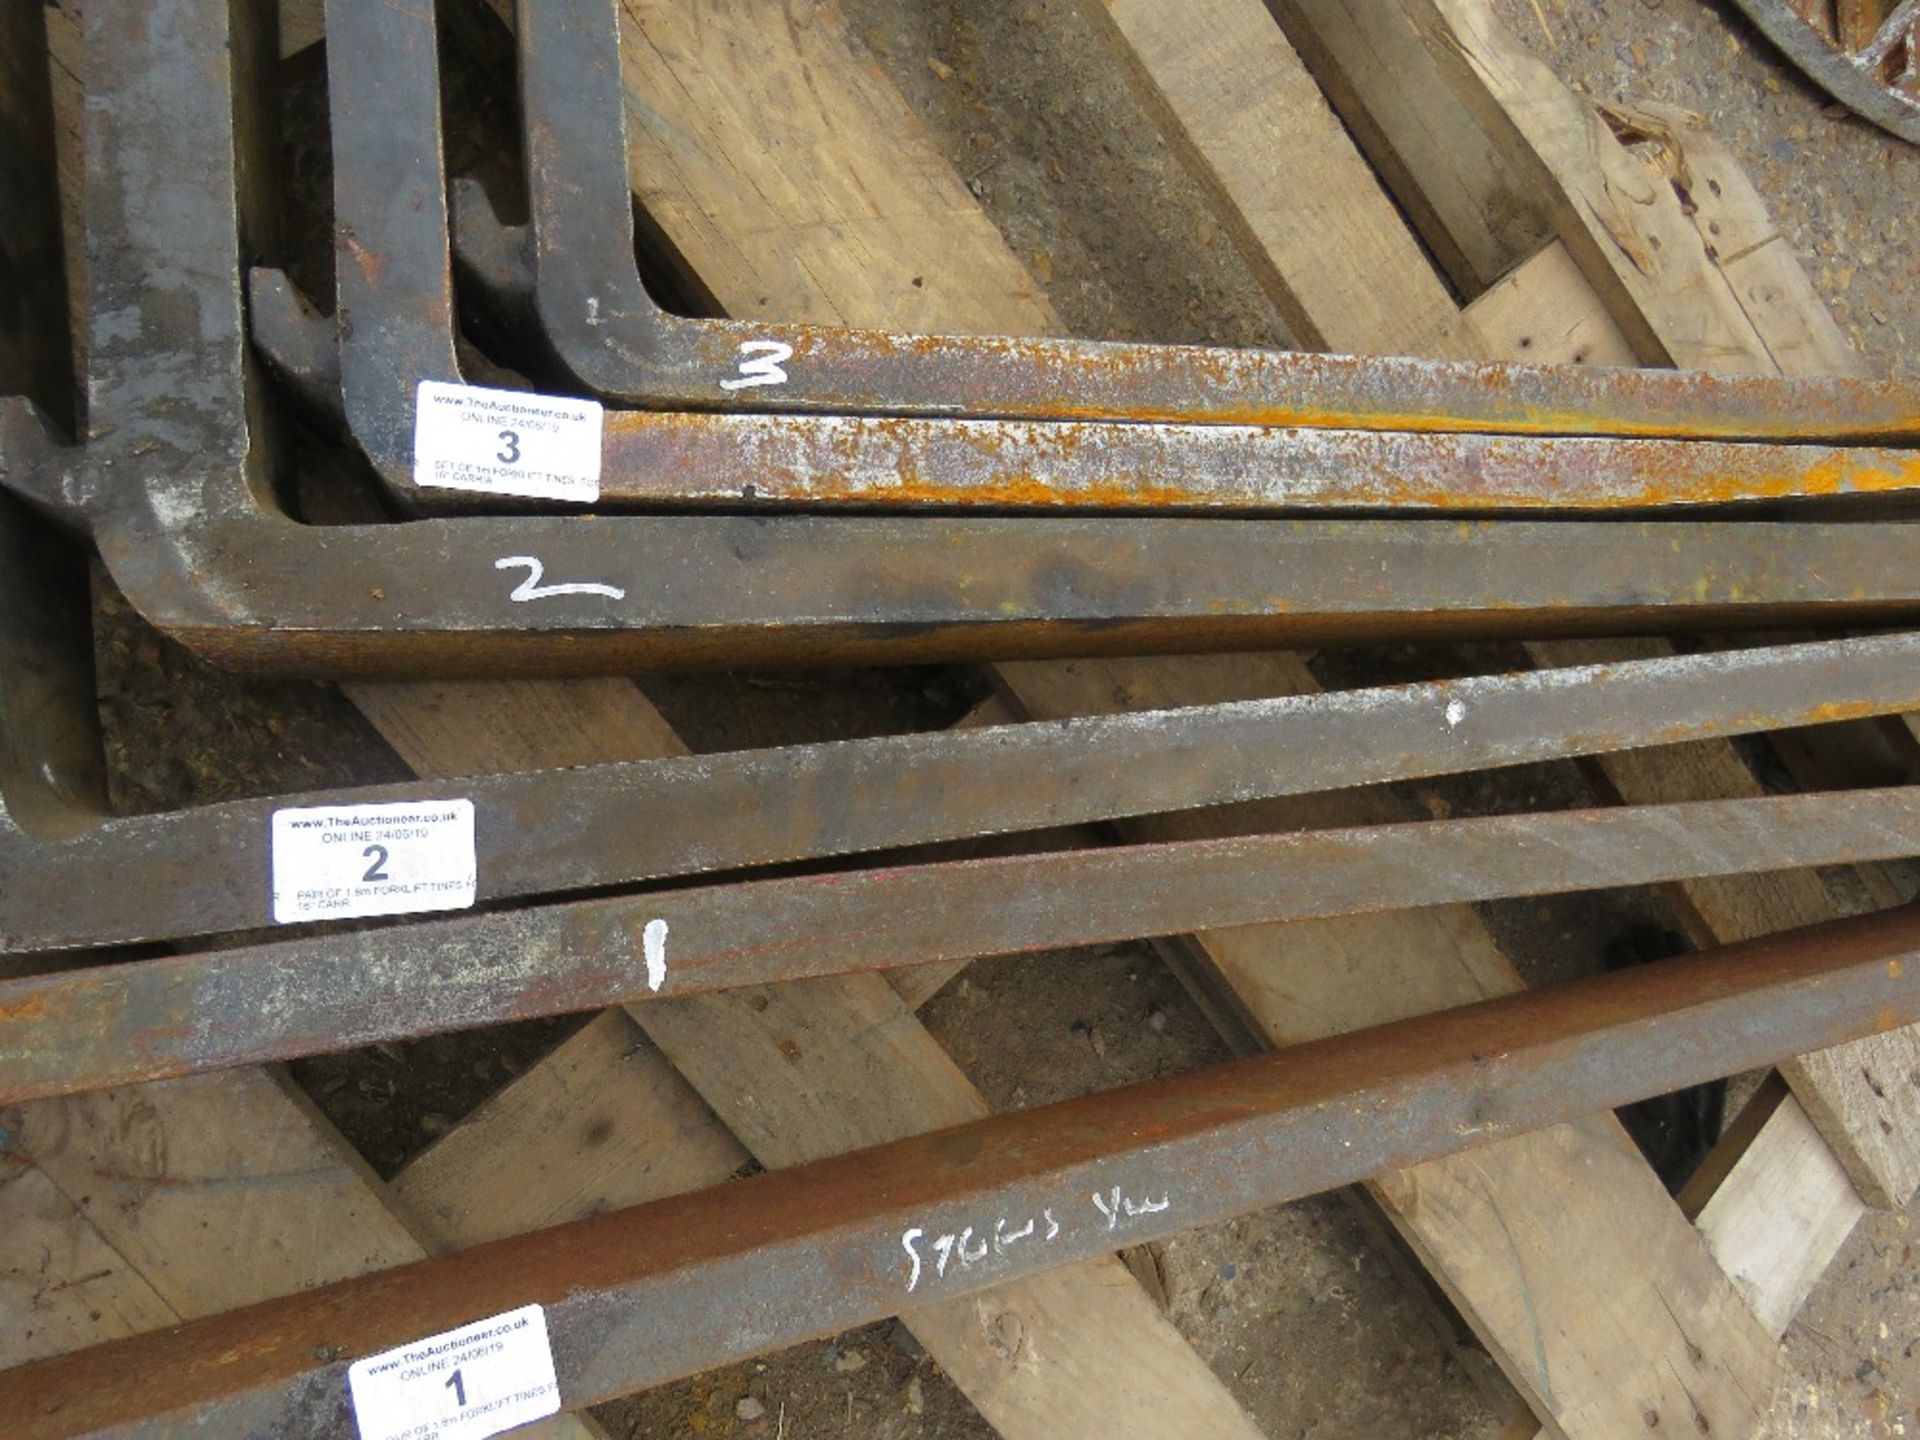 PAIR OF 1.8m FORKLIFT TINES FOR 16" CARRIAGE, UNTESTED - Image 2 of 2